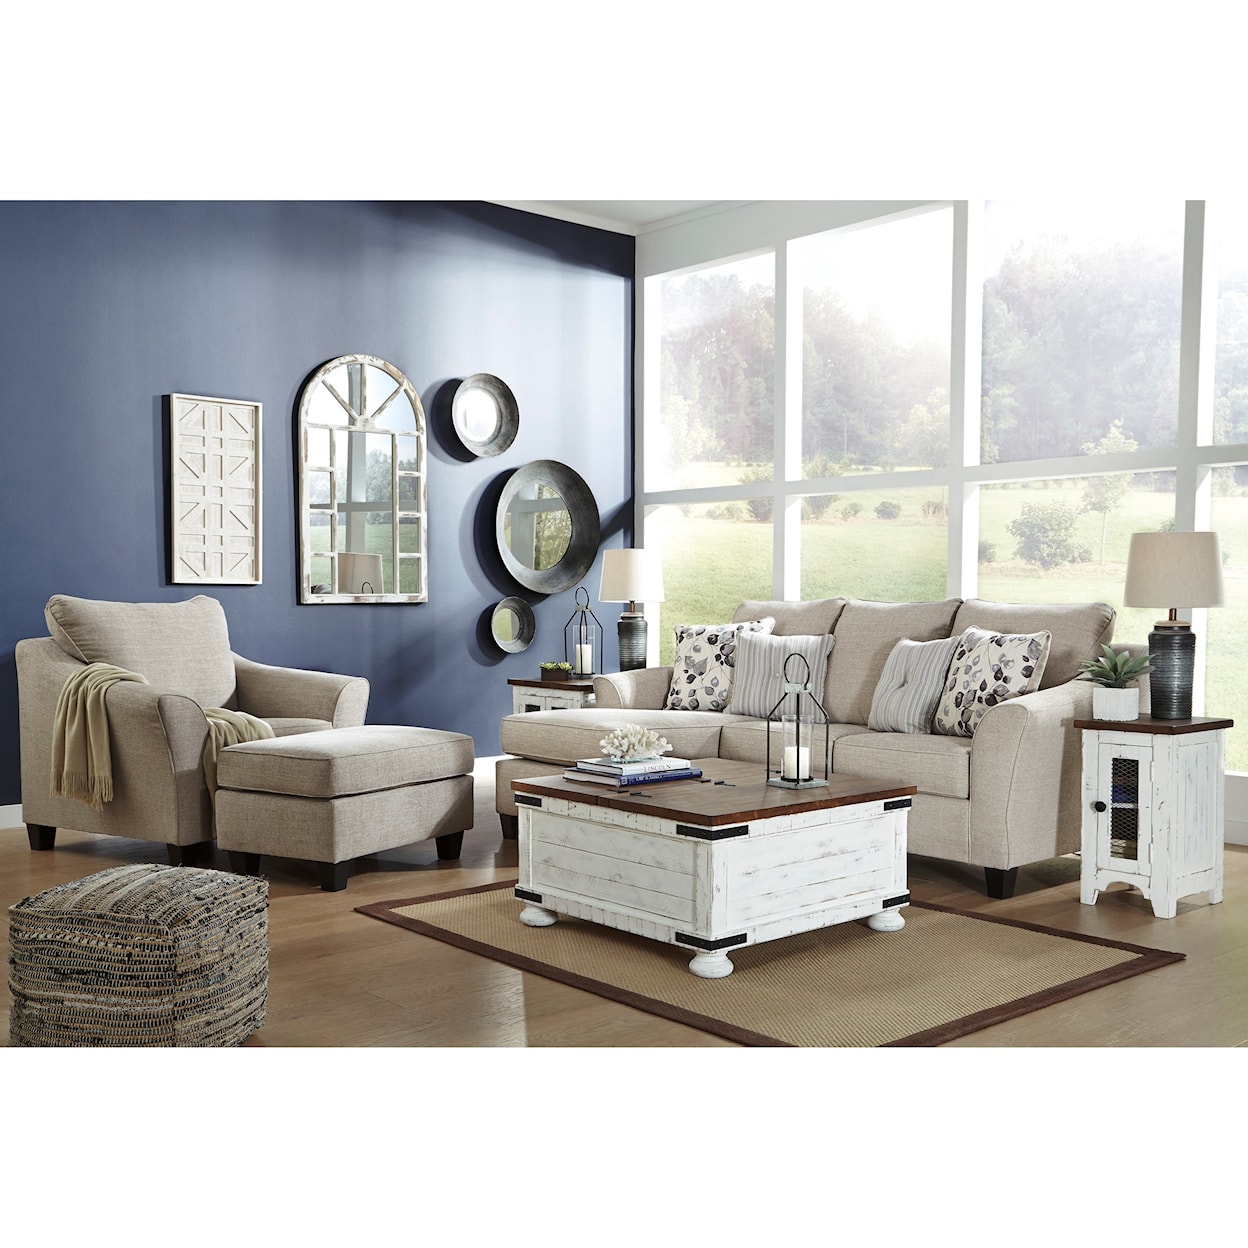 Benchcraft Abney 3pc Living Room Group